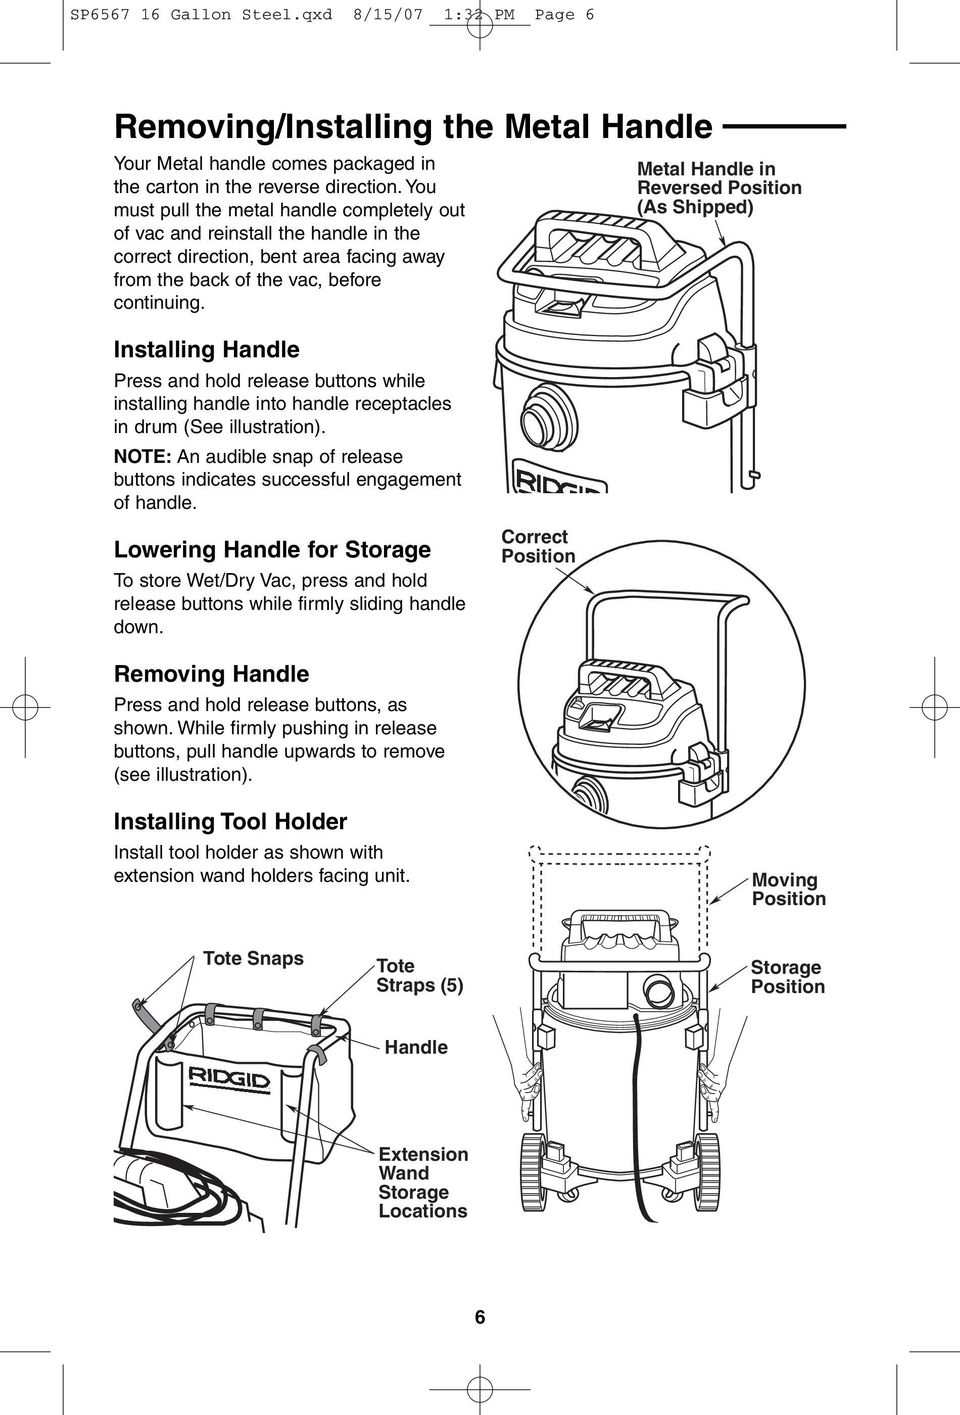 Metal Handle in Reversed Position (As Shipped) Installing Handle Press and hold release buttons while installing handle into handle receptacles in drum (See illustration).